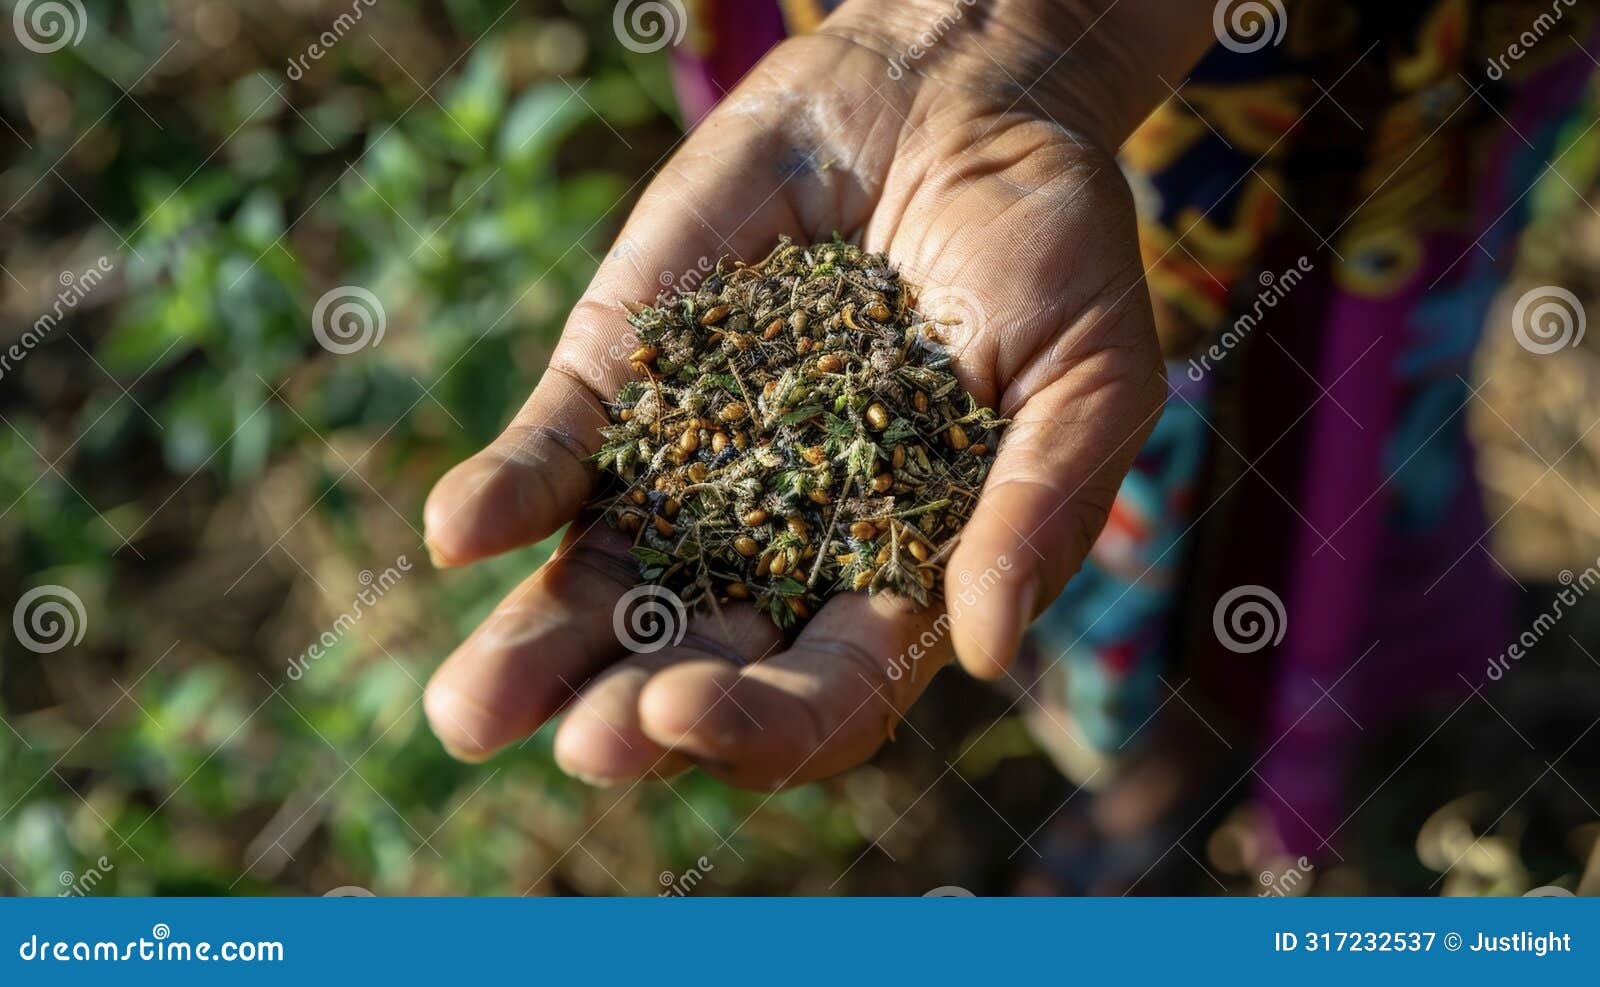 a delicate hand holding a handful of dried herbs used for centuries in traditional medicine for their healing properties